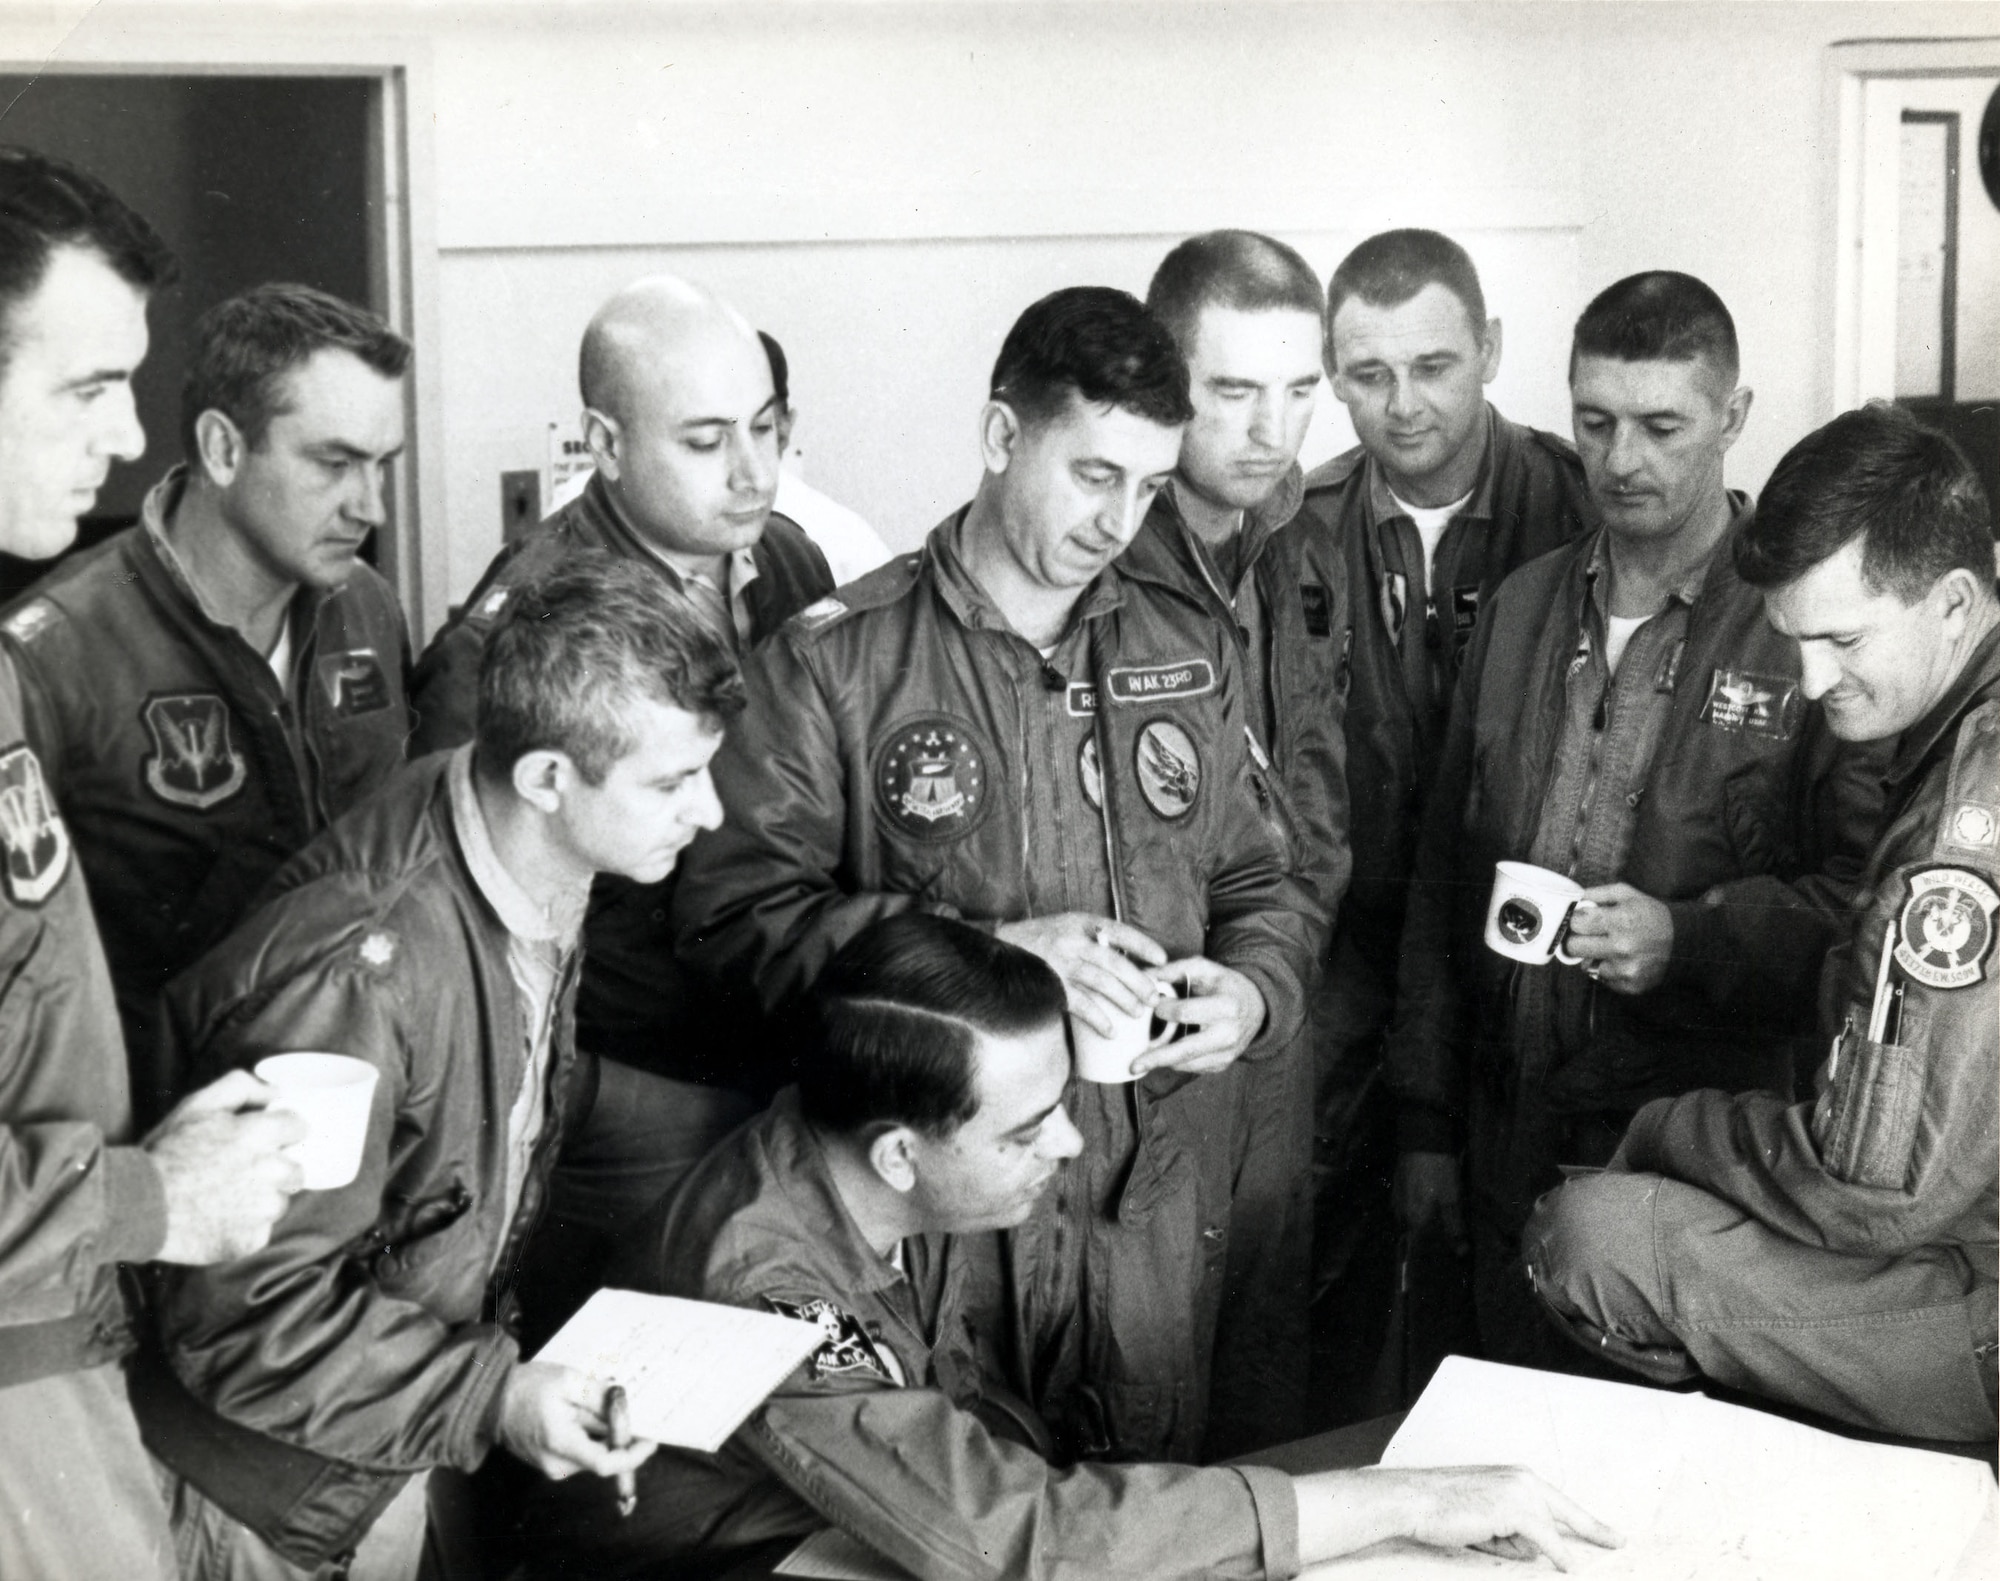 Before completing their training, they were hurriedly deployed to Osan AB, South Korea, in January 1968 in response to the Pueblo incident (North Korea captured a U.S. ship and its crew). Pictured here is Maj. Billy Sparks briefing the deploying Wild Weasel crews about the North Korean SAM threat. (U.S. Air Force photo)